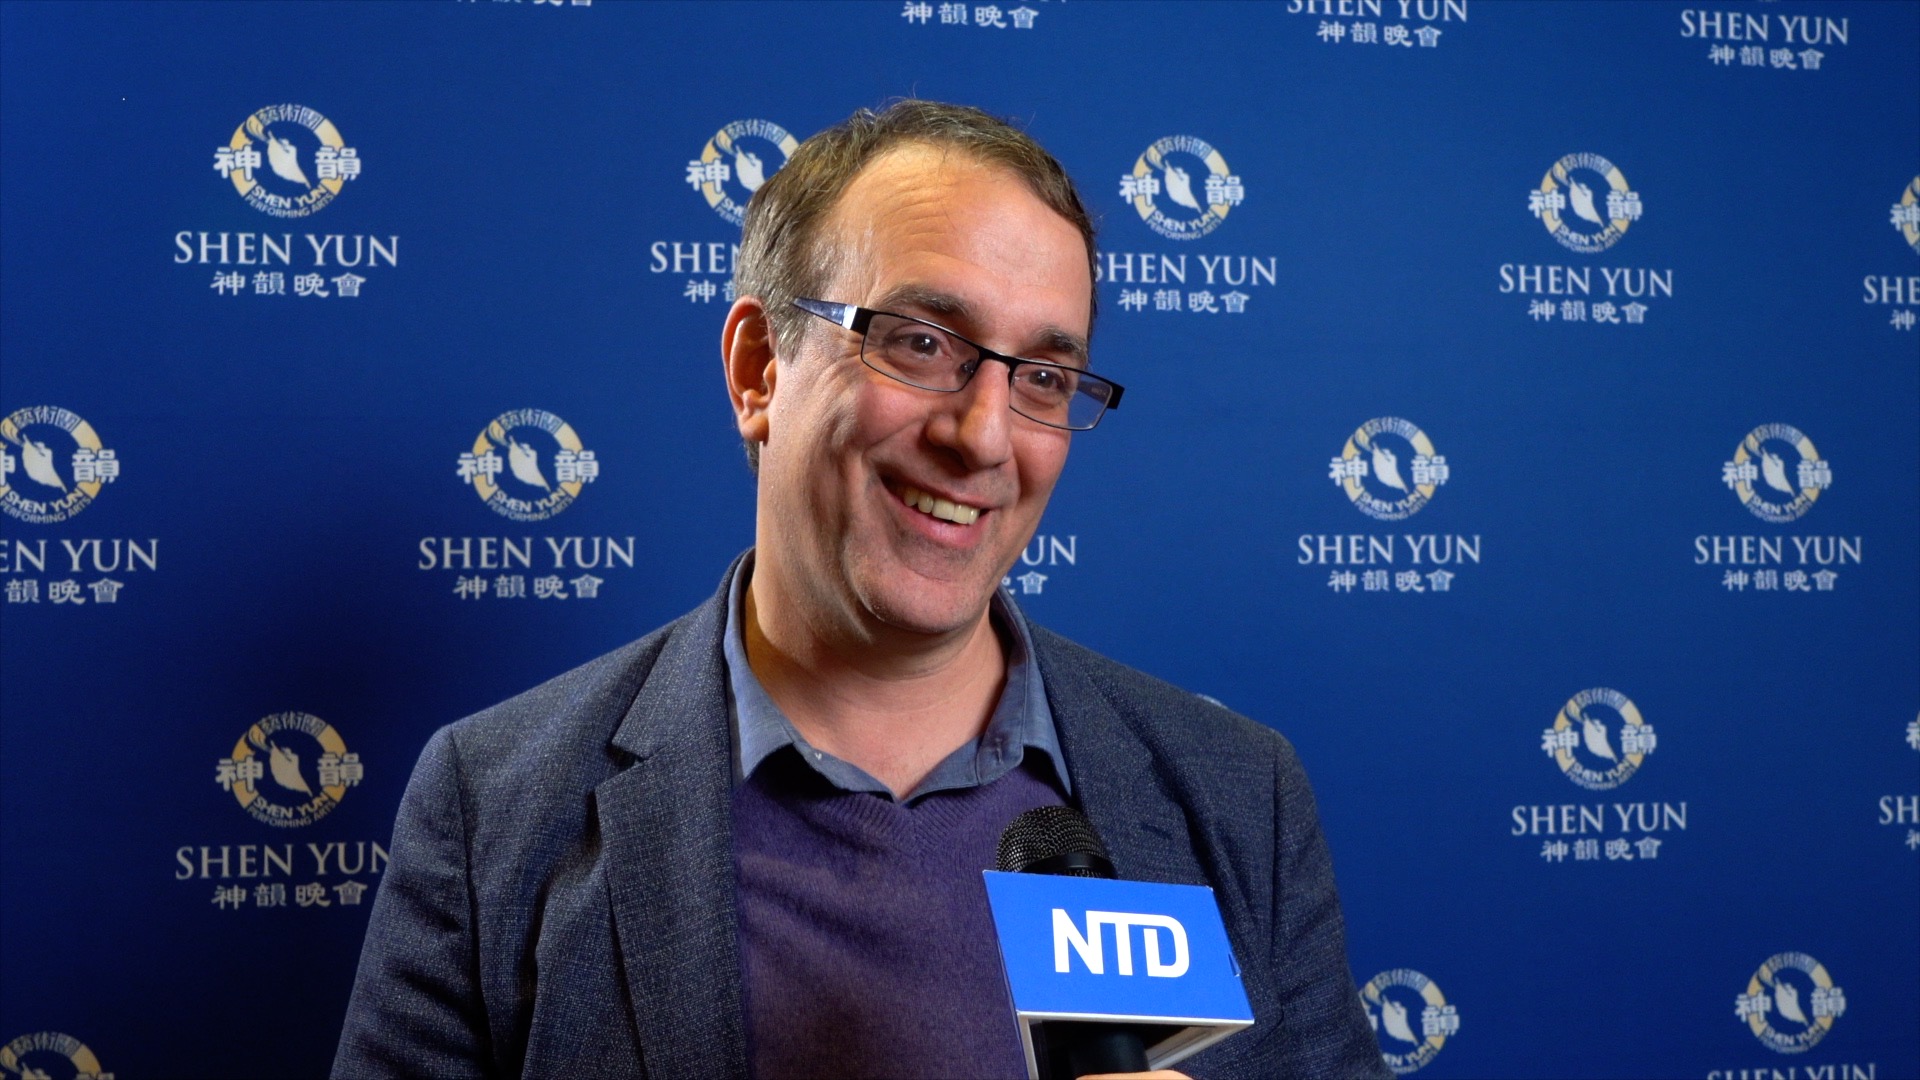 Shen Yun Has 'A Very Healing Influence' Says Institute President